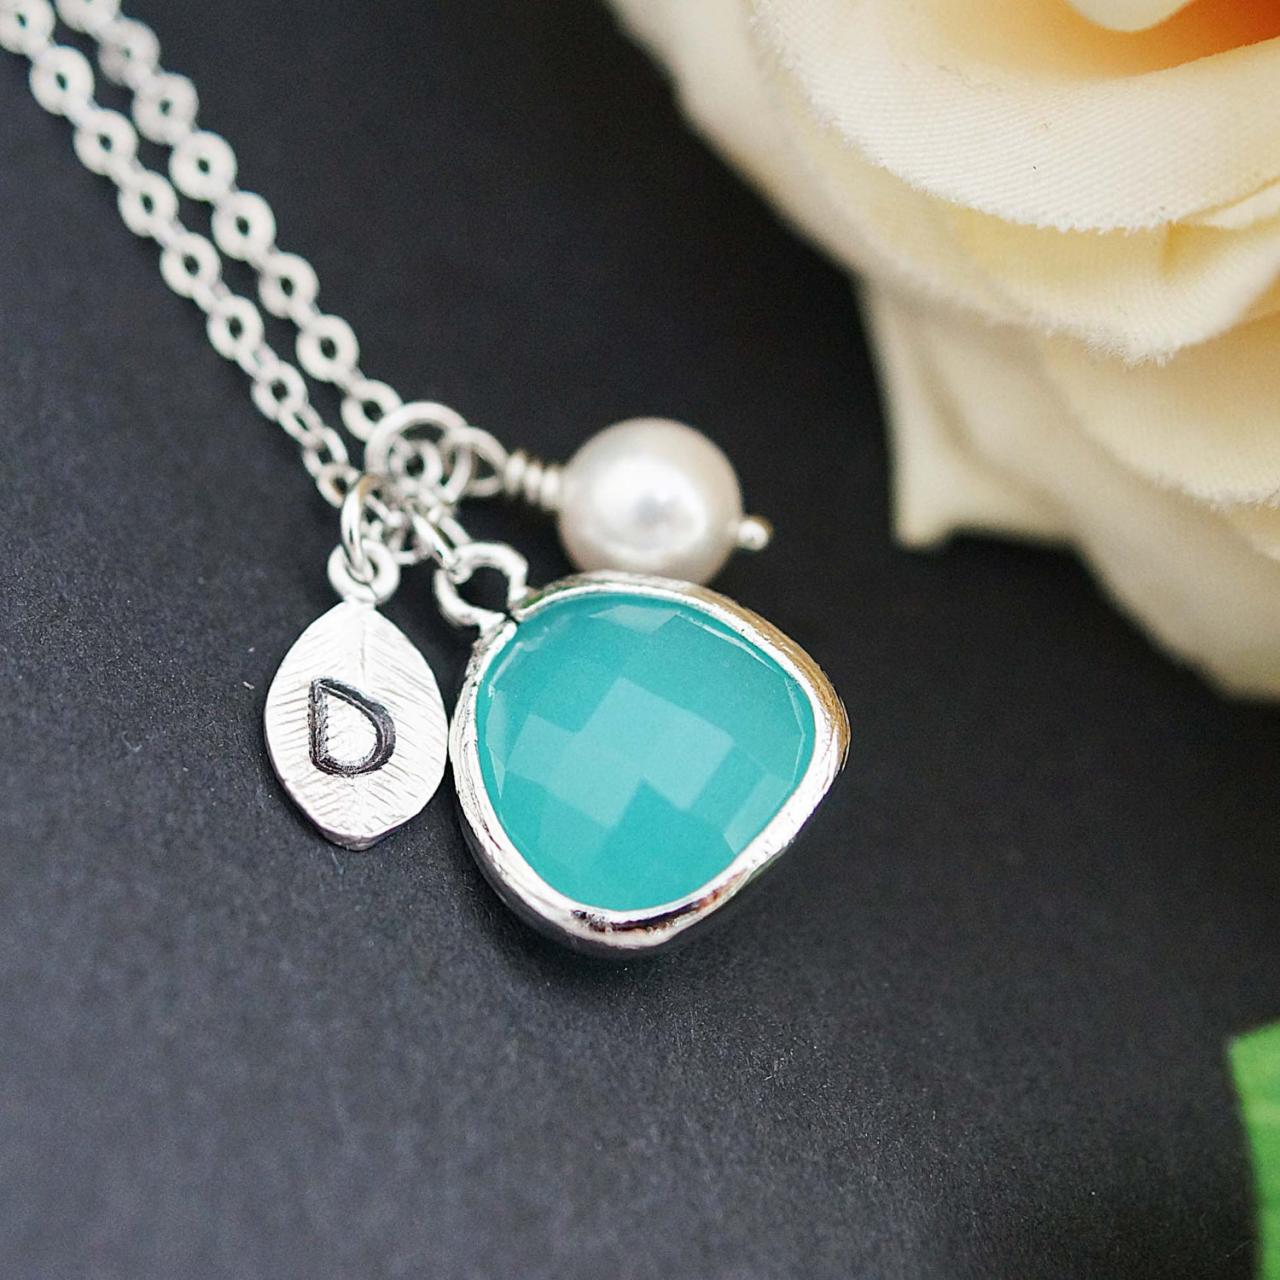 Wedding Jewelry Christmas Gift Bridesmaids Gift Bridesmaid Necklace Bridesmaid Jewelry Personalized Initial Necklace Mint Opal Glass